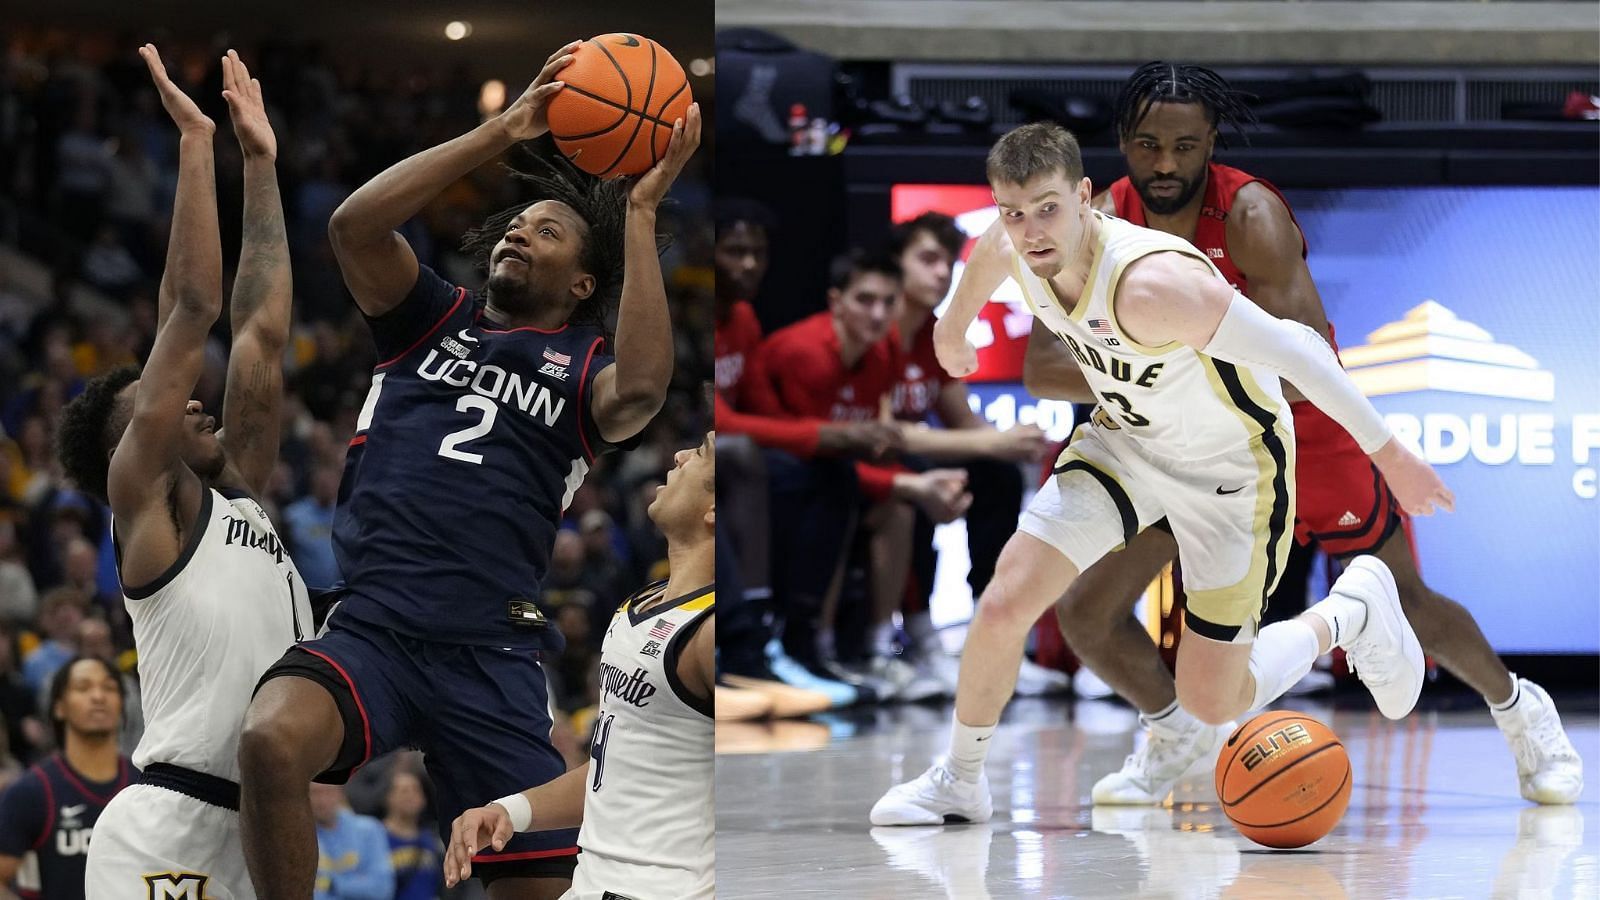 UConn and Purdue are two favorite to prevail in Elite Eight matchups in coming days.